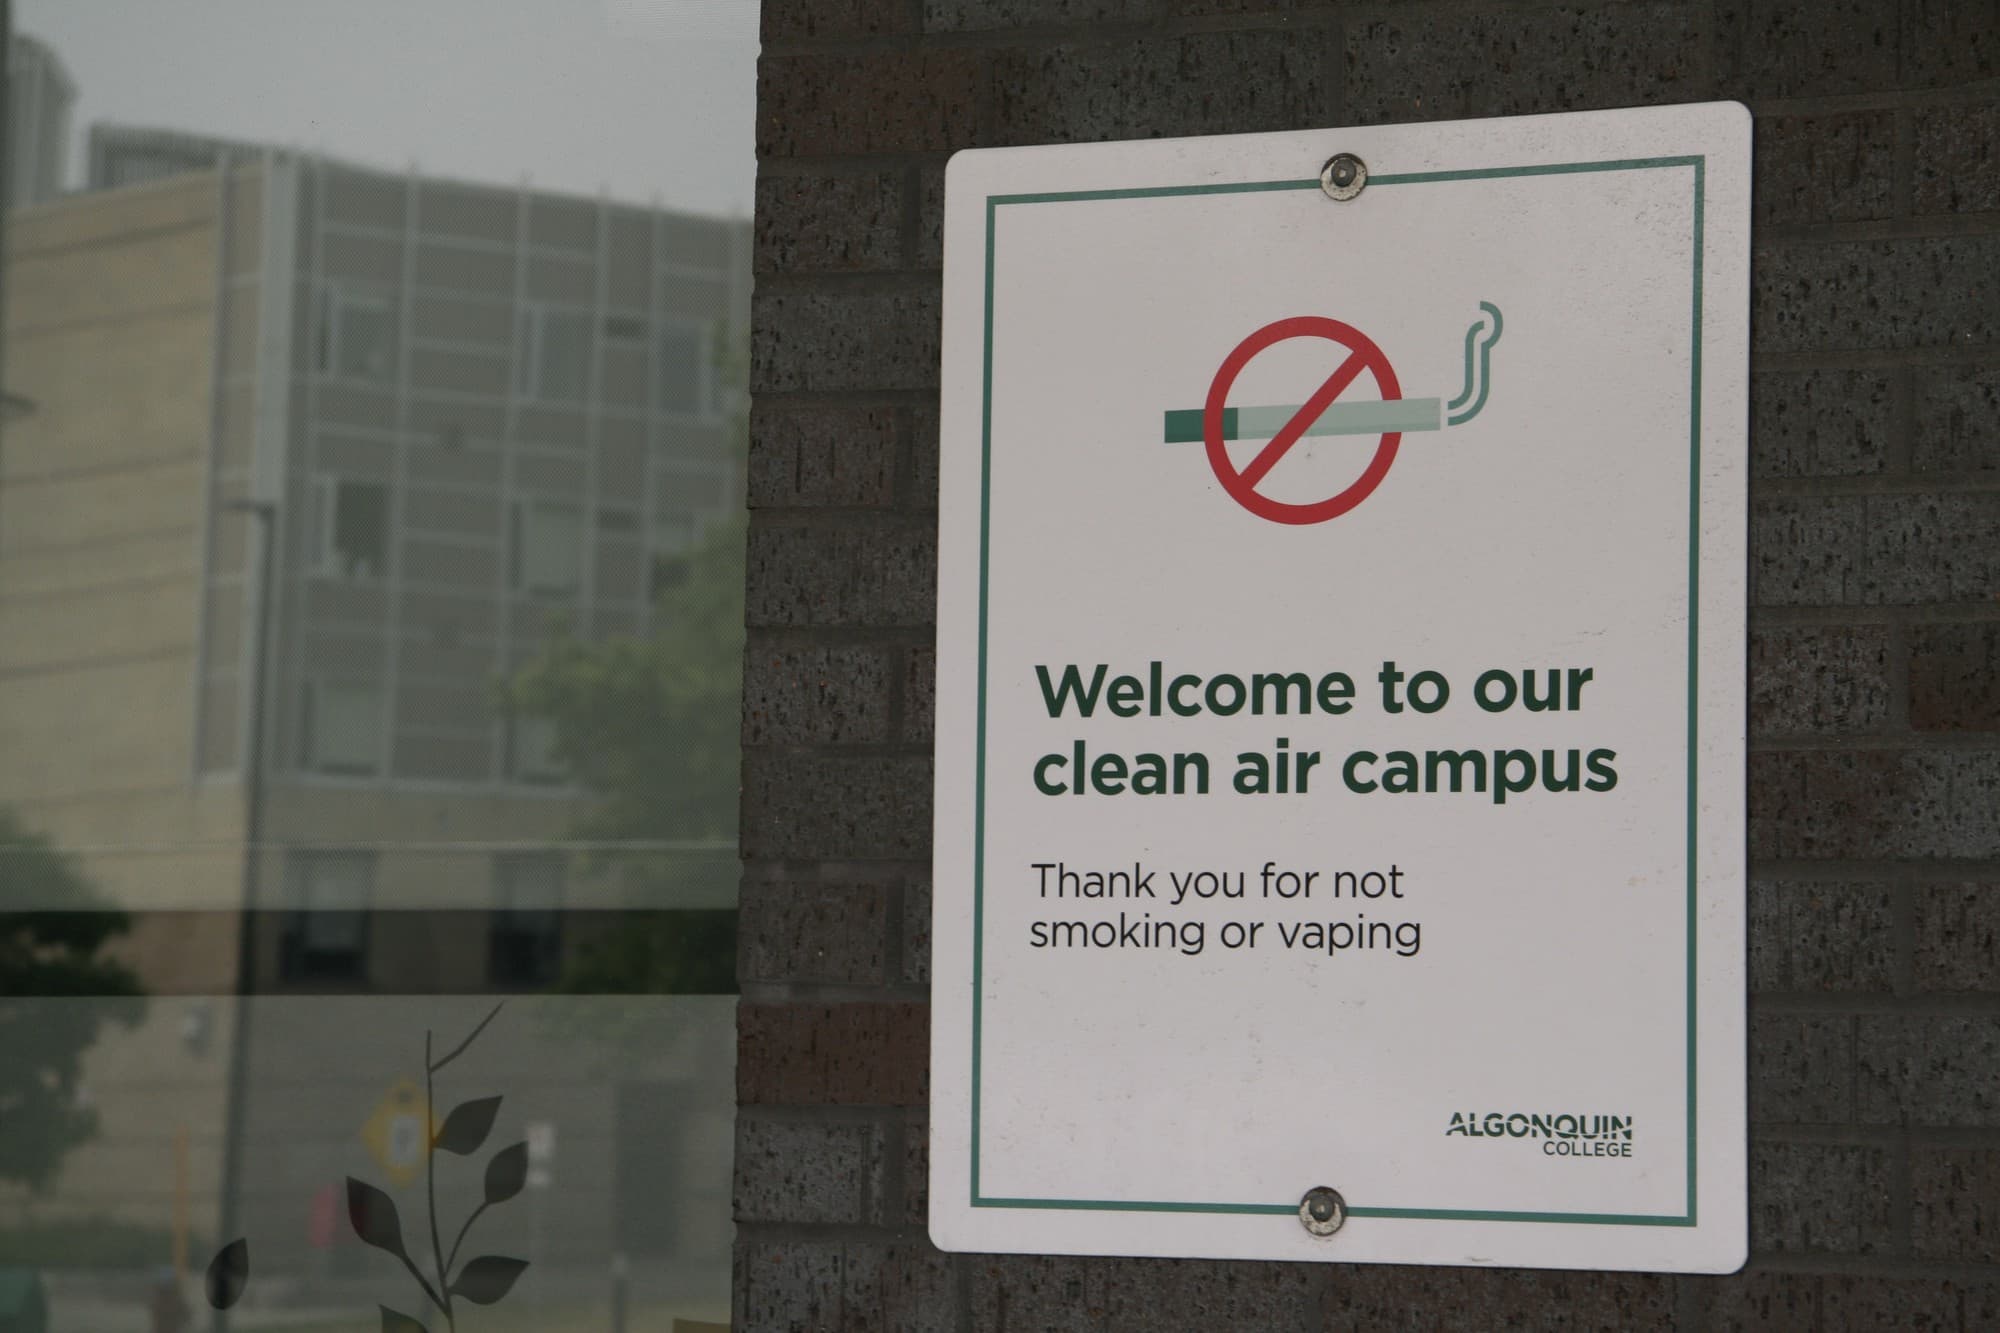 Heavy smoke from wildfires filled the air at Algonquin College